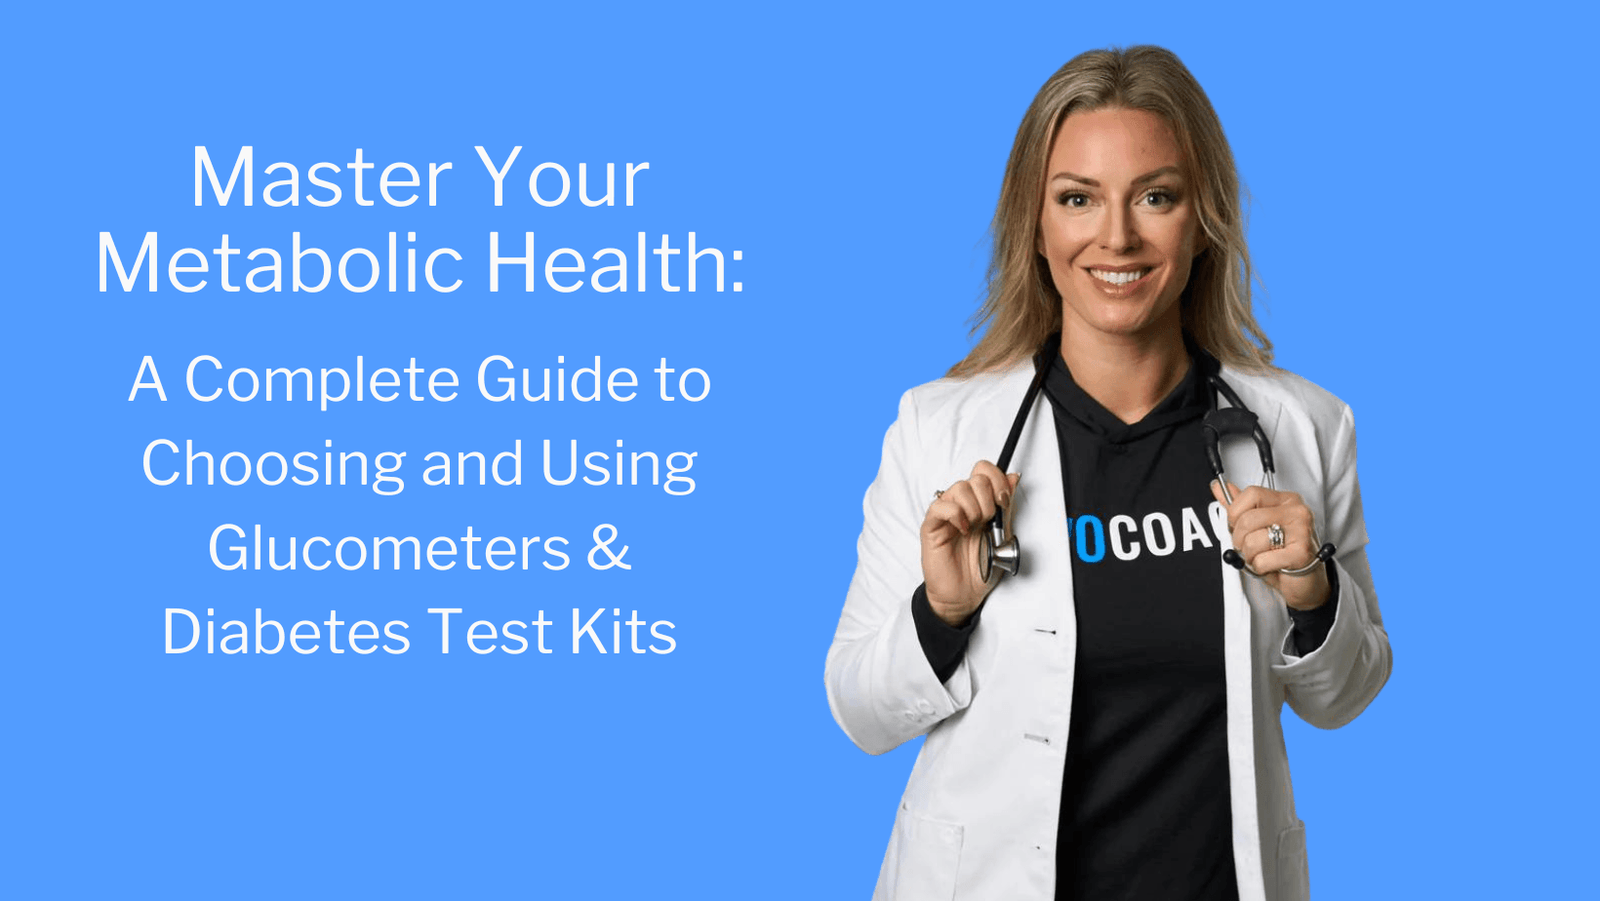 Master Your Metabolic Health: A Complete Guide to Choosing and Using BioCoach Glucometers & Diabetes Test Kits - BioCoach